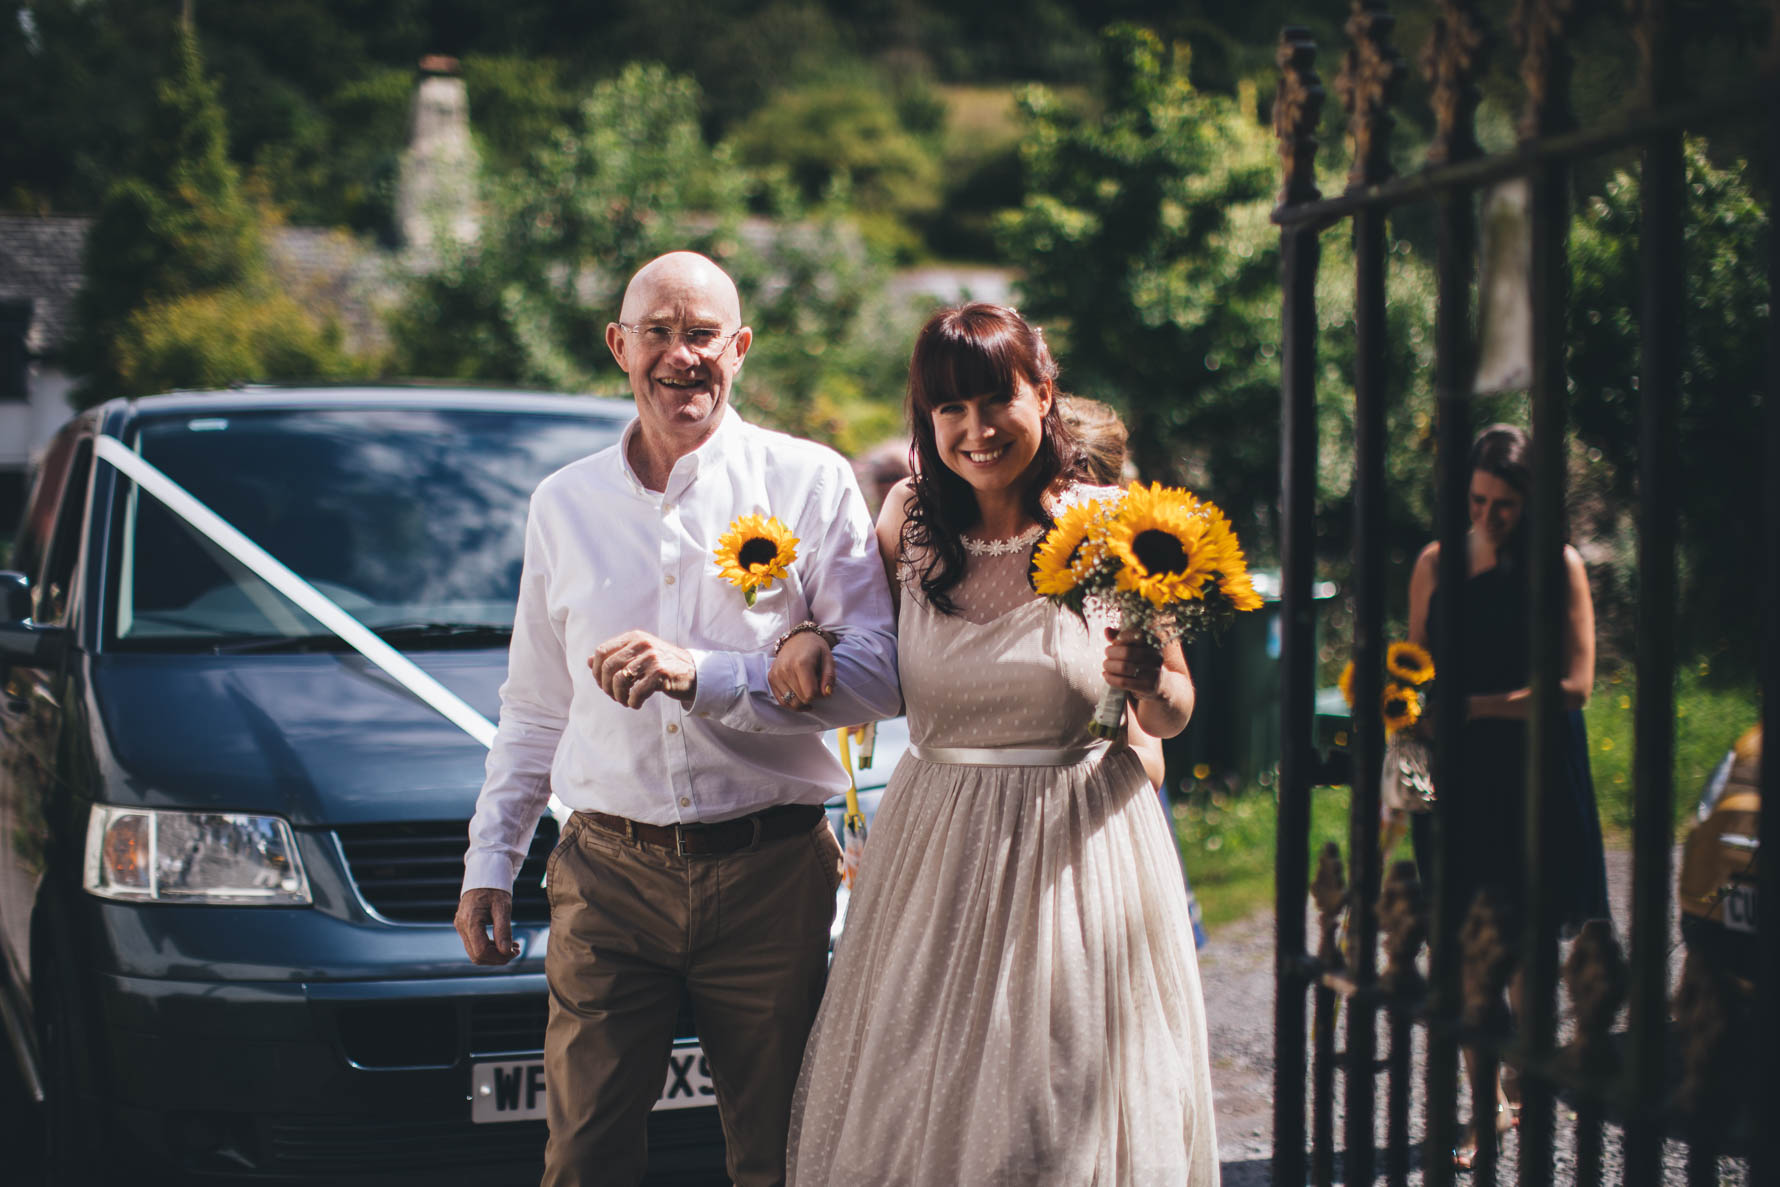 Bride and her father walking into a church. The bride is holding a bouquet of sunflowers and her father is wearing a white shirt and khaki chinos with a sunflower buttonhole. There is a blue car with a white ribbon on the front behind the two of them and a large iron gate to the right of the picture